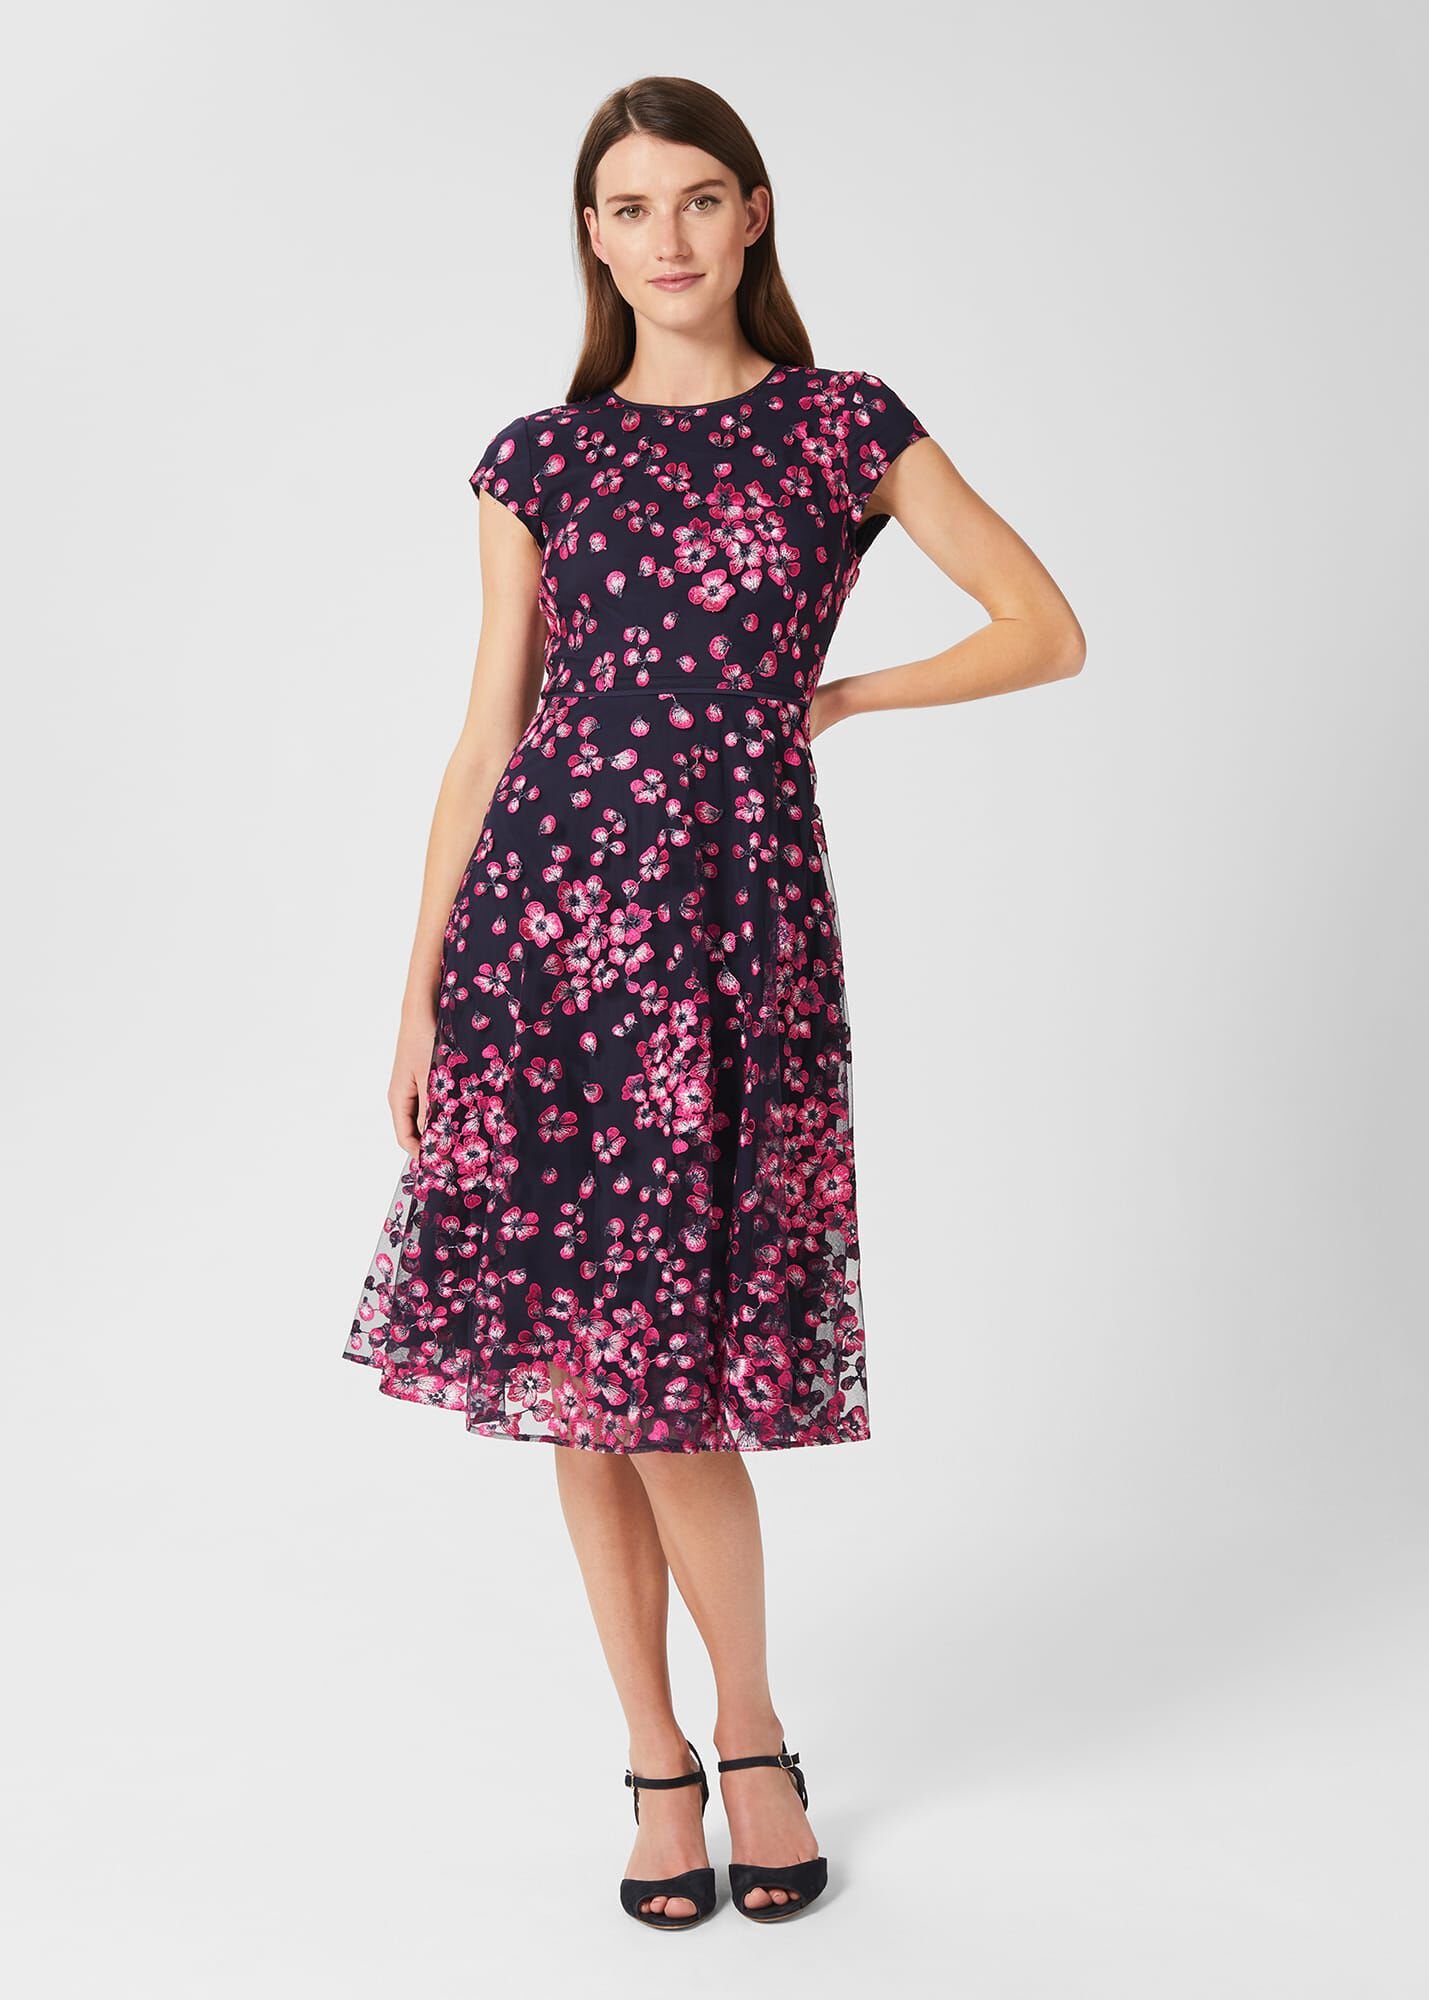 Tia Floral Embroidered Dress Navy Pink Tulle Fabric Luxury Occasionwear